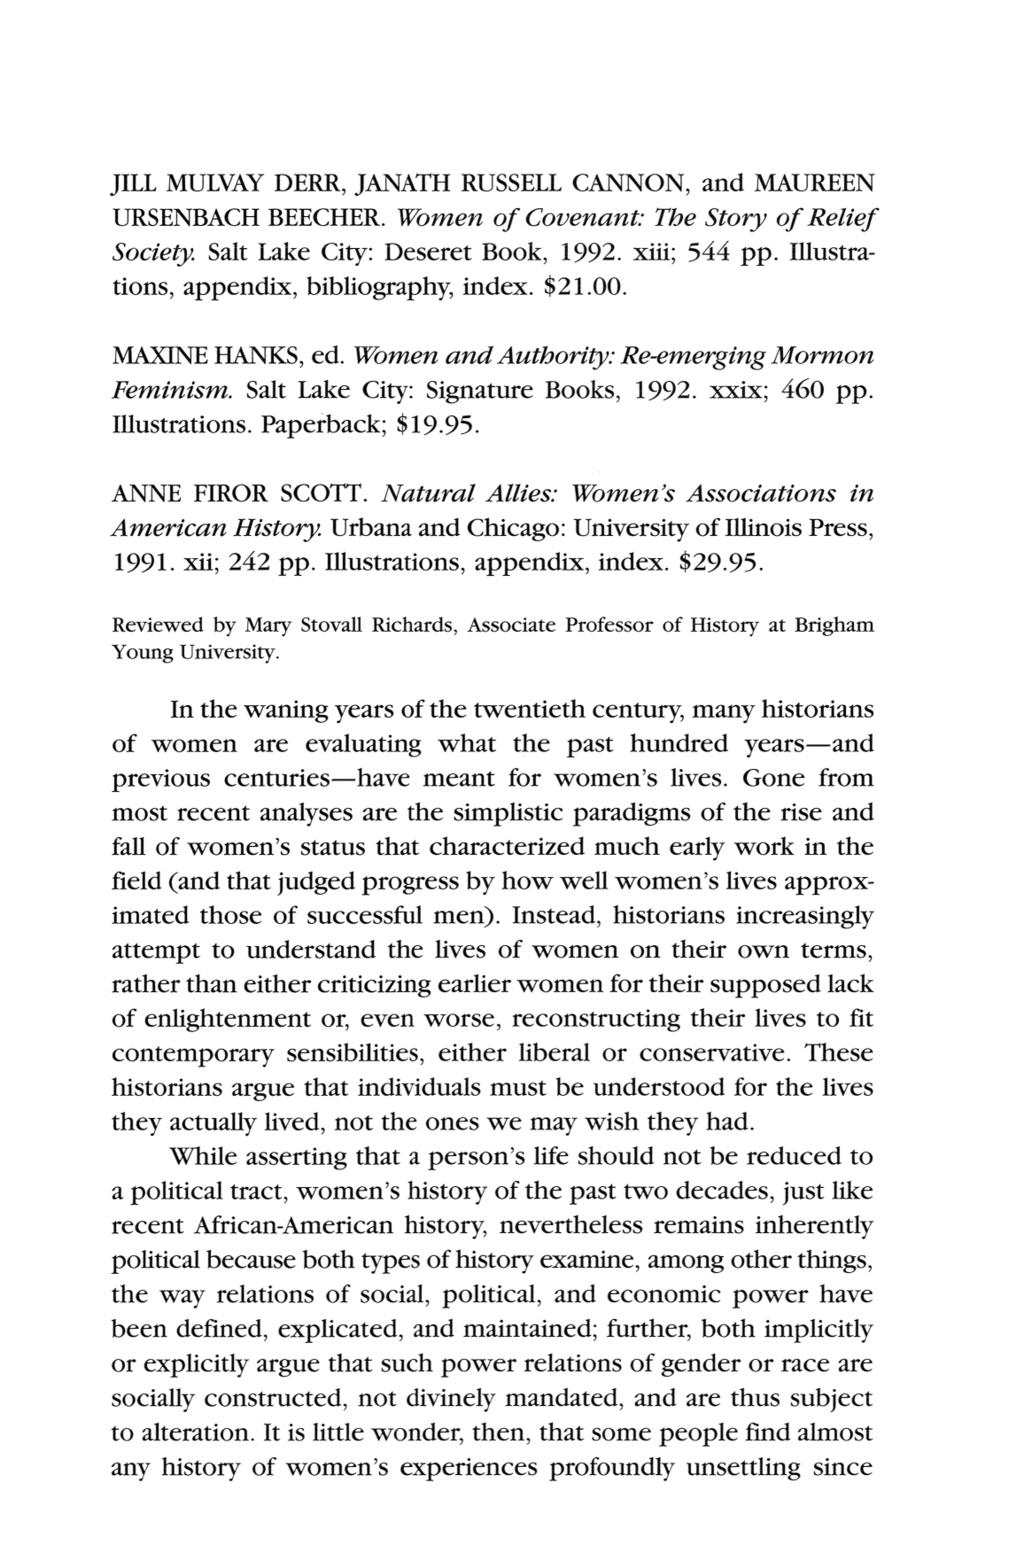 Richards: <em>women of Covenant: The Story of Relief Society</em> by Jill M JILL MULVAY DERR JANATH RUSSELL CANNON and MAUREEN ap illustra- URSENBACH BEECHER women of covenant the story of relief